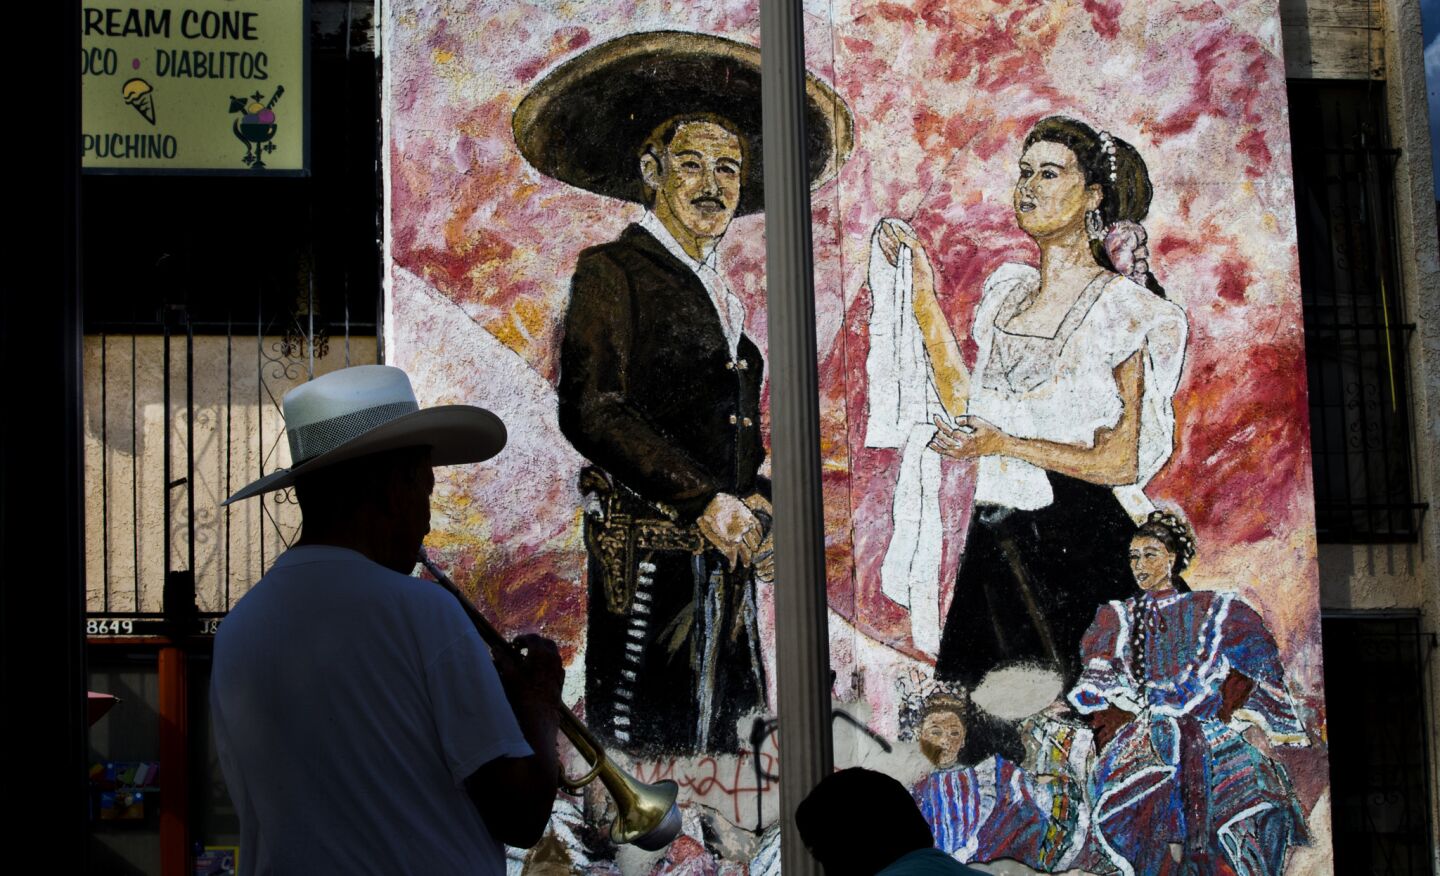 Mariachi player Natolio Nuñez, who has been playing trumpet for 40 years, practices in the shade in Mariachi Plaza in Boyle Heights.